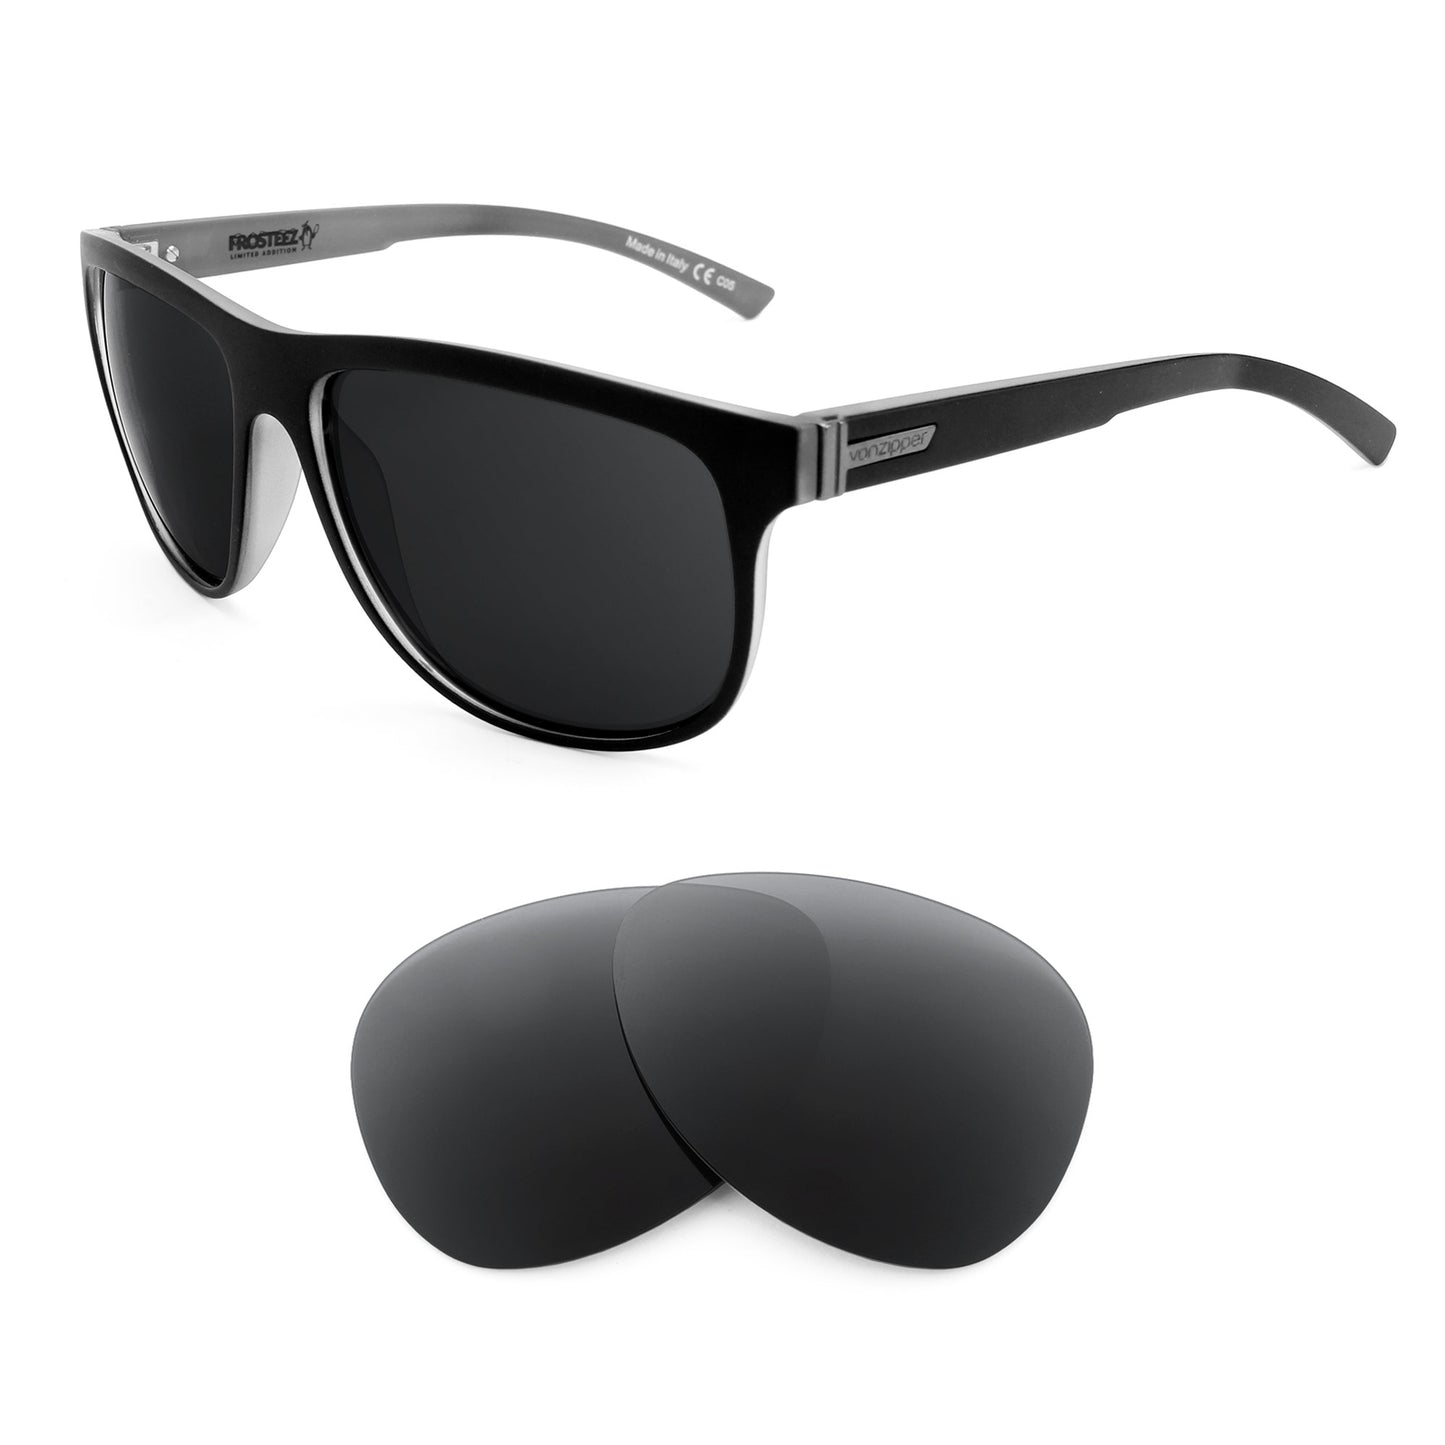 VonZipper Cletus sunglasses with replacement lenses